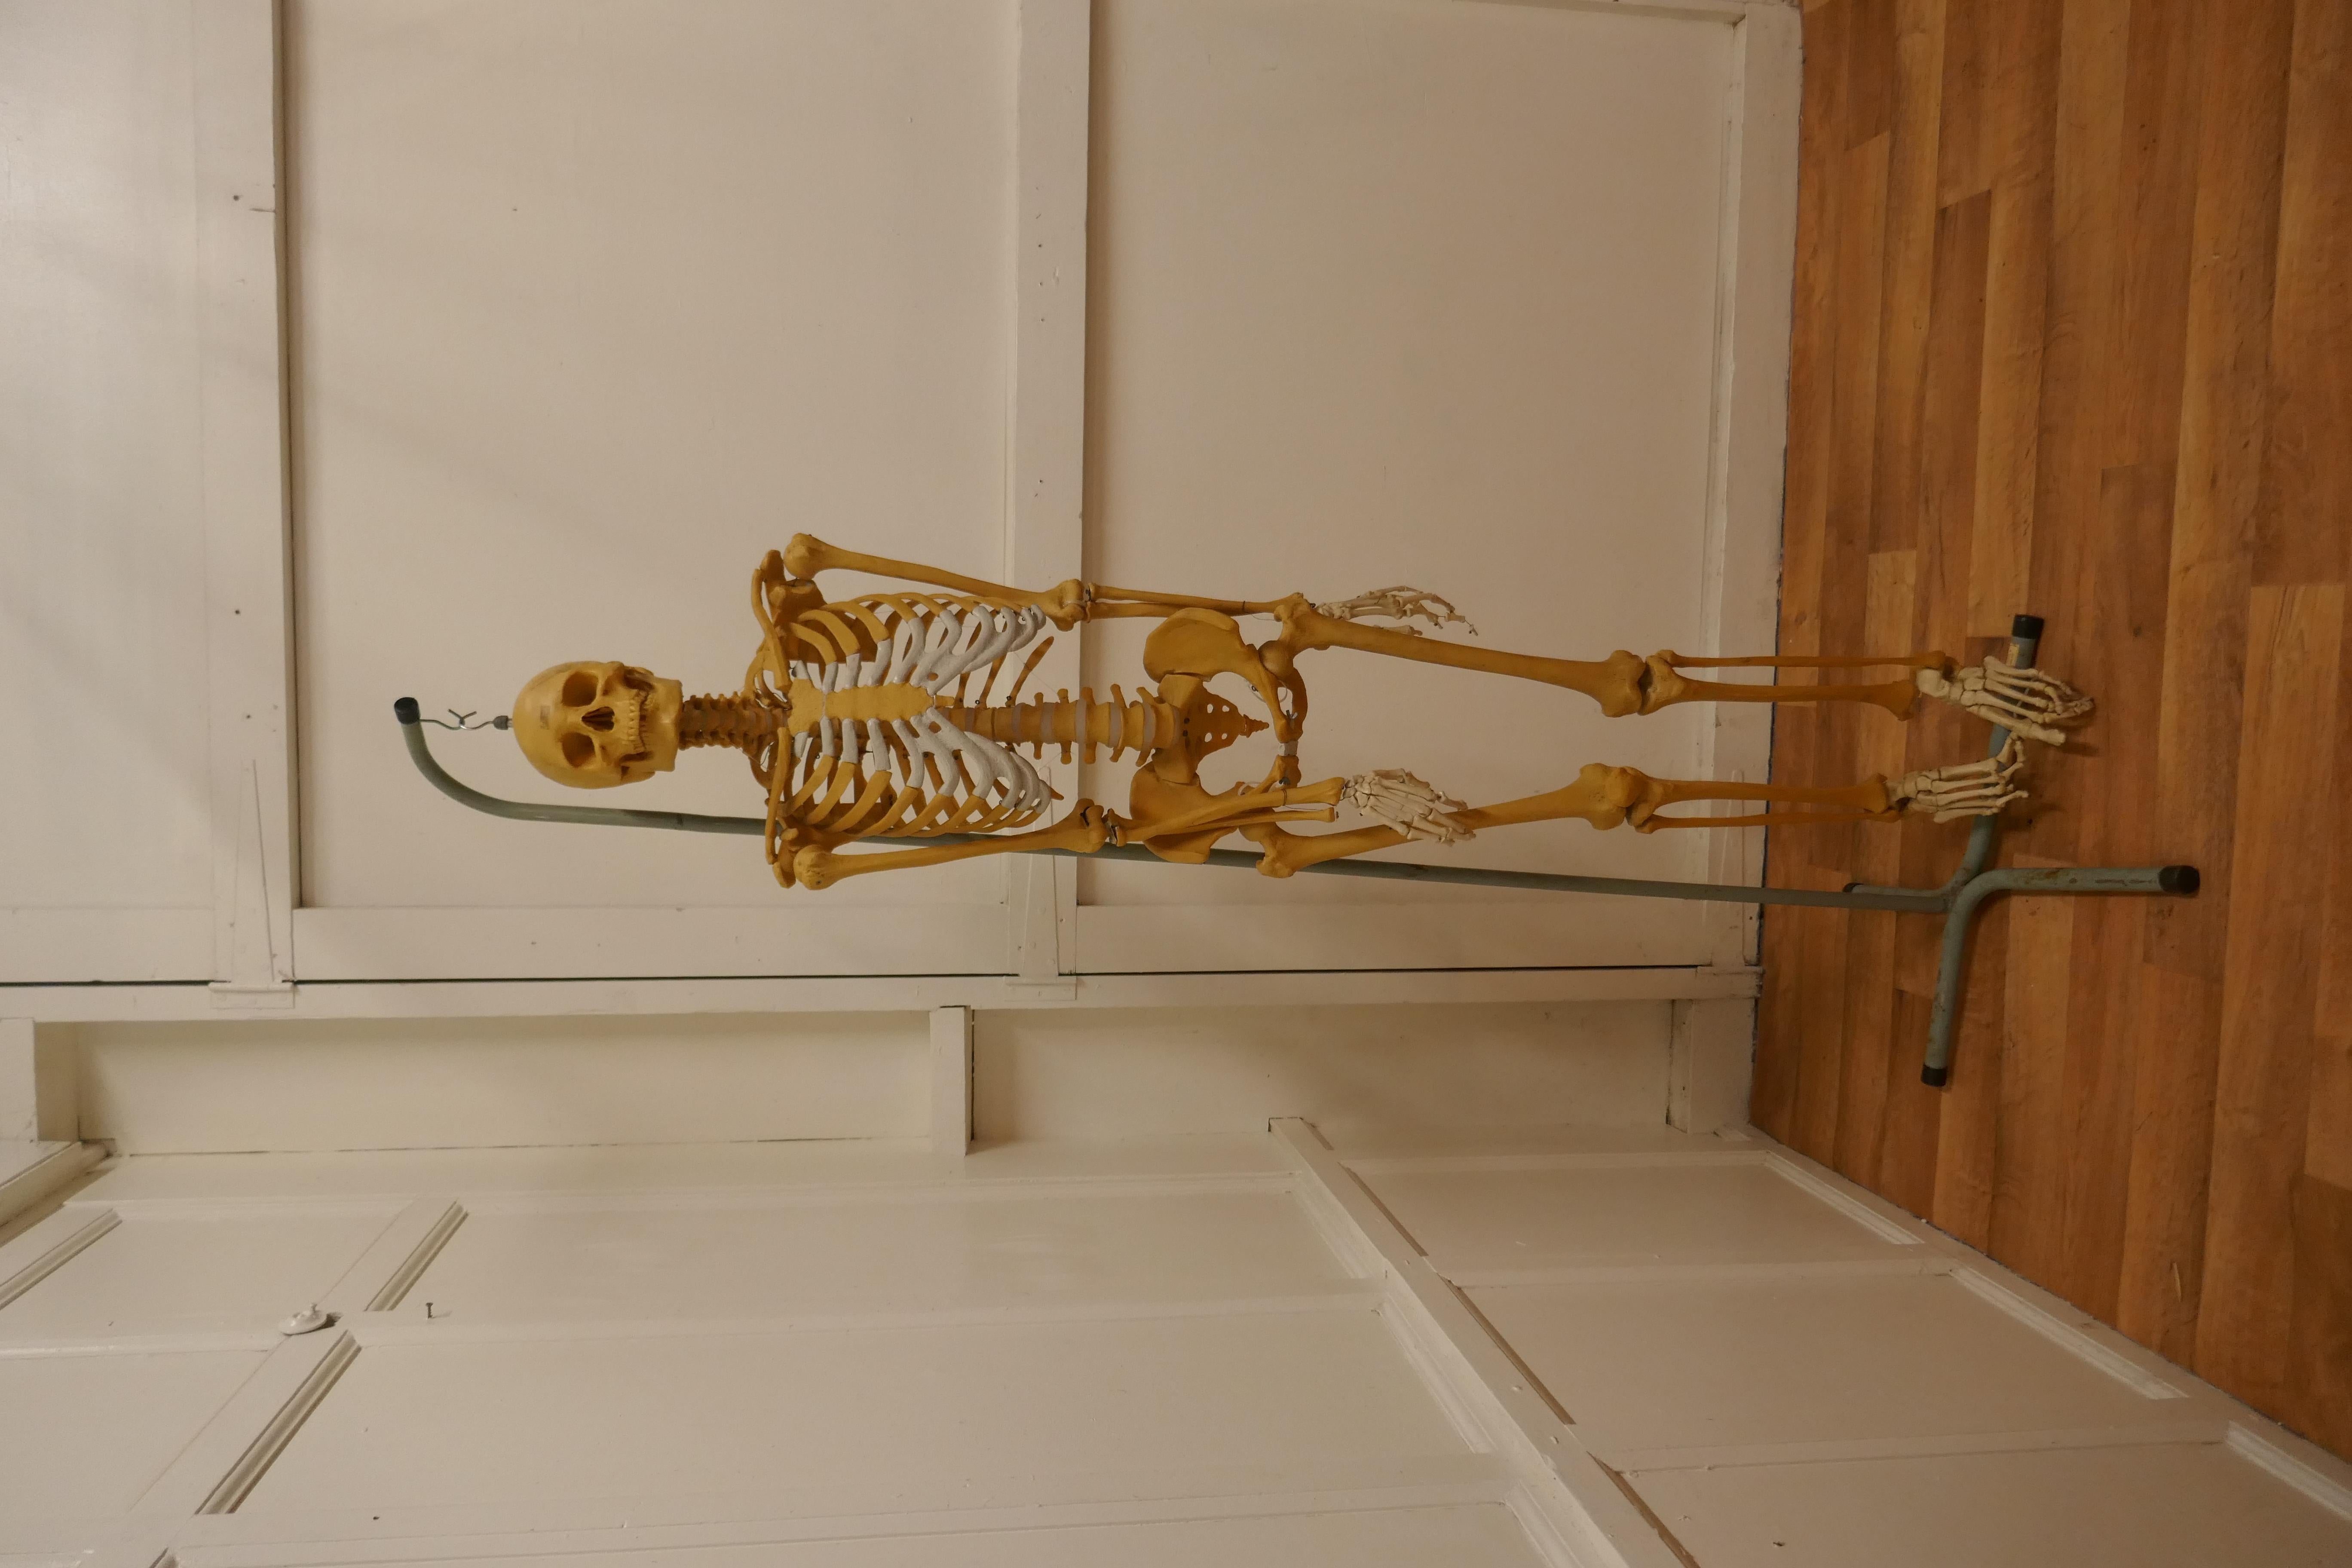 Life-size 1950s Skeleton Teaching Aid on Stand

A 1950s original teaching aid, quirky and fun decoration, the piece is more or less intact it has been well used so has a few running repairs (mostly with electrical ties) but never the less a good